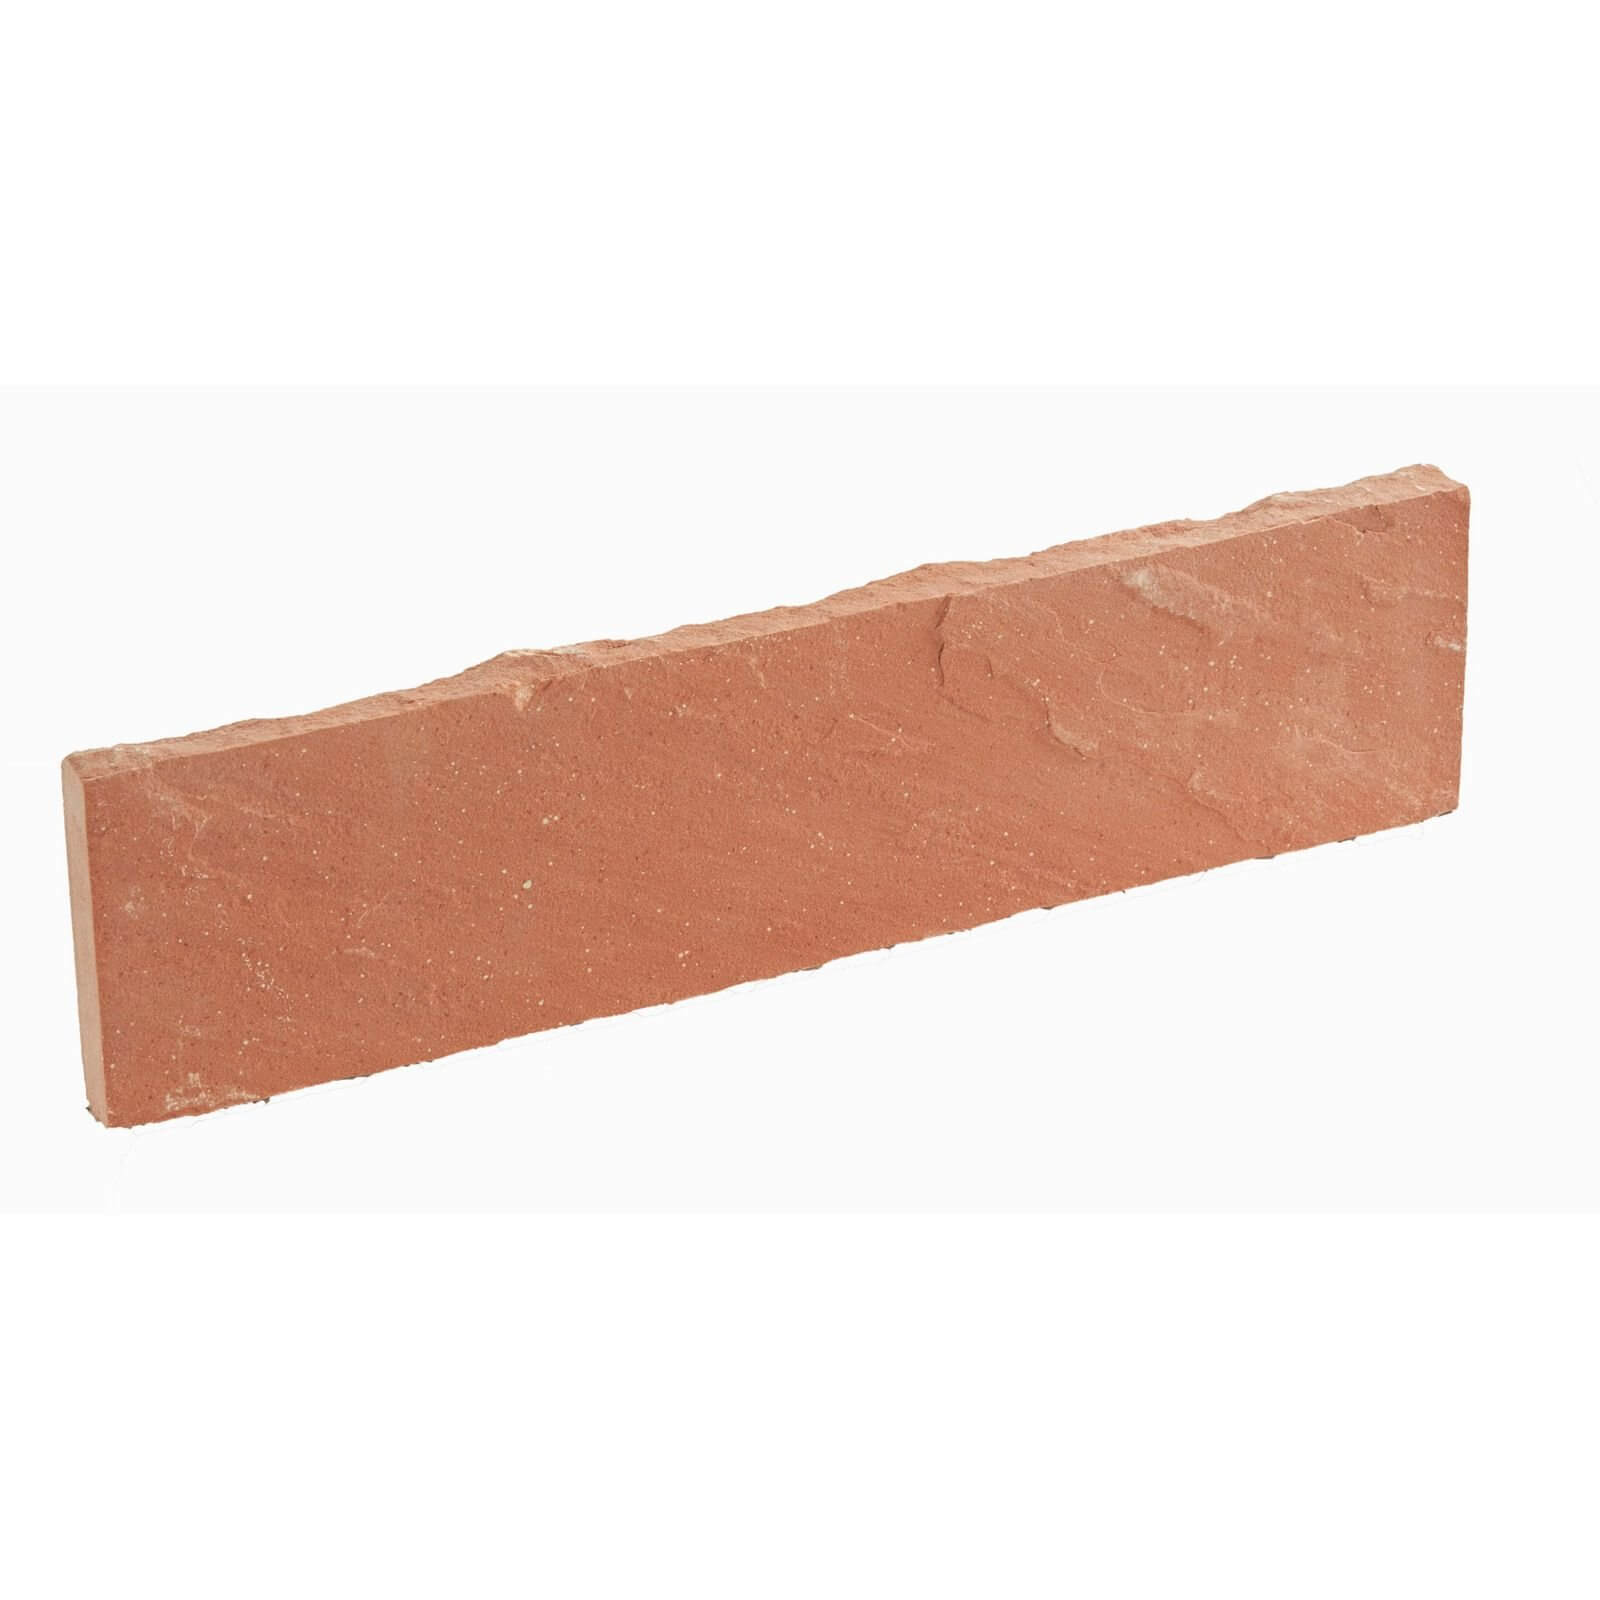 Stylish Stone Natural Stone Coping Or Edging - Sunset Red